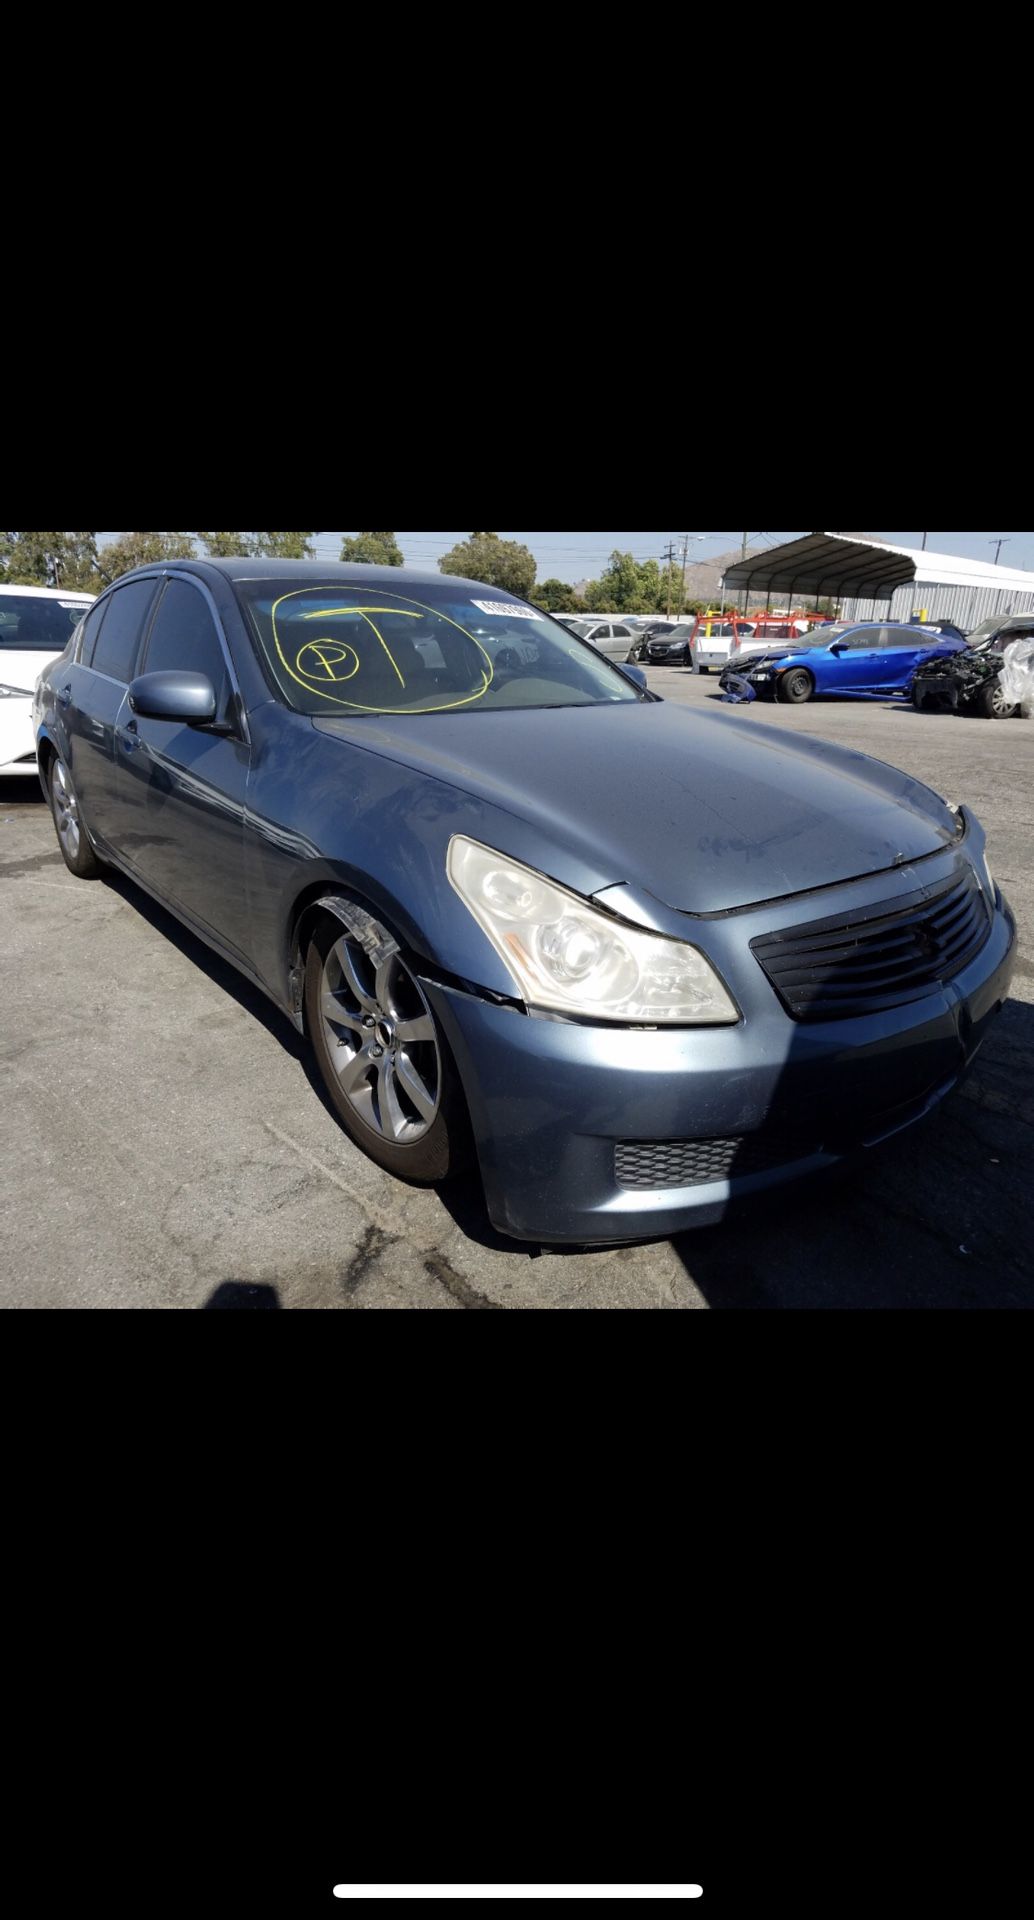 2007-2013 Infiniti g35/g37 parts only